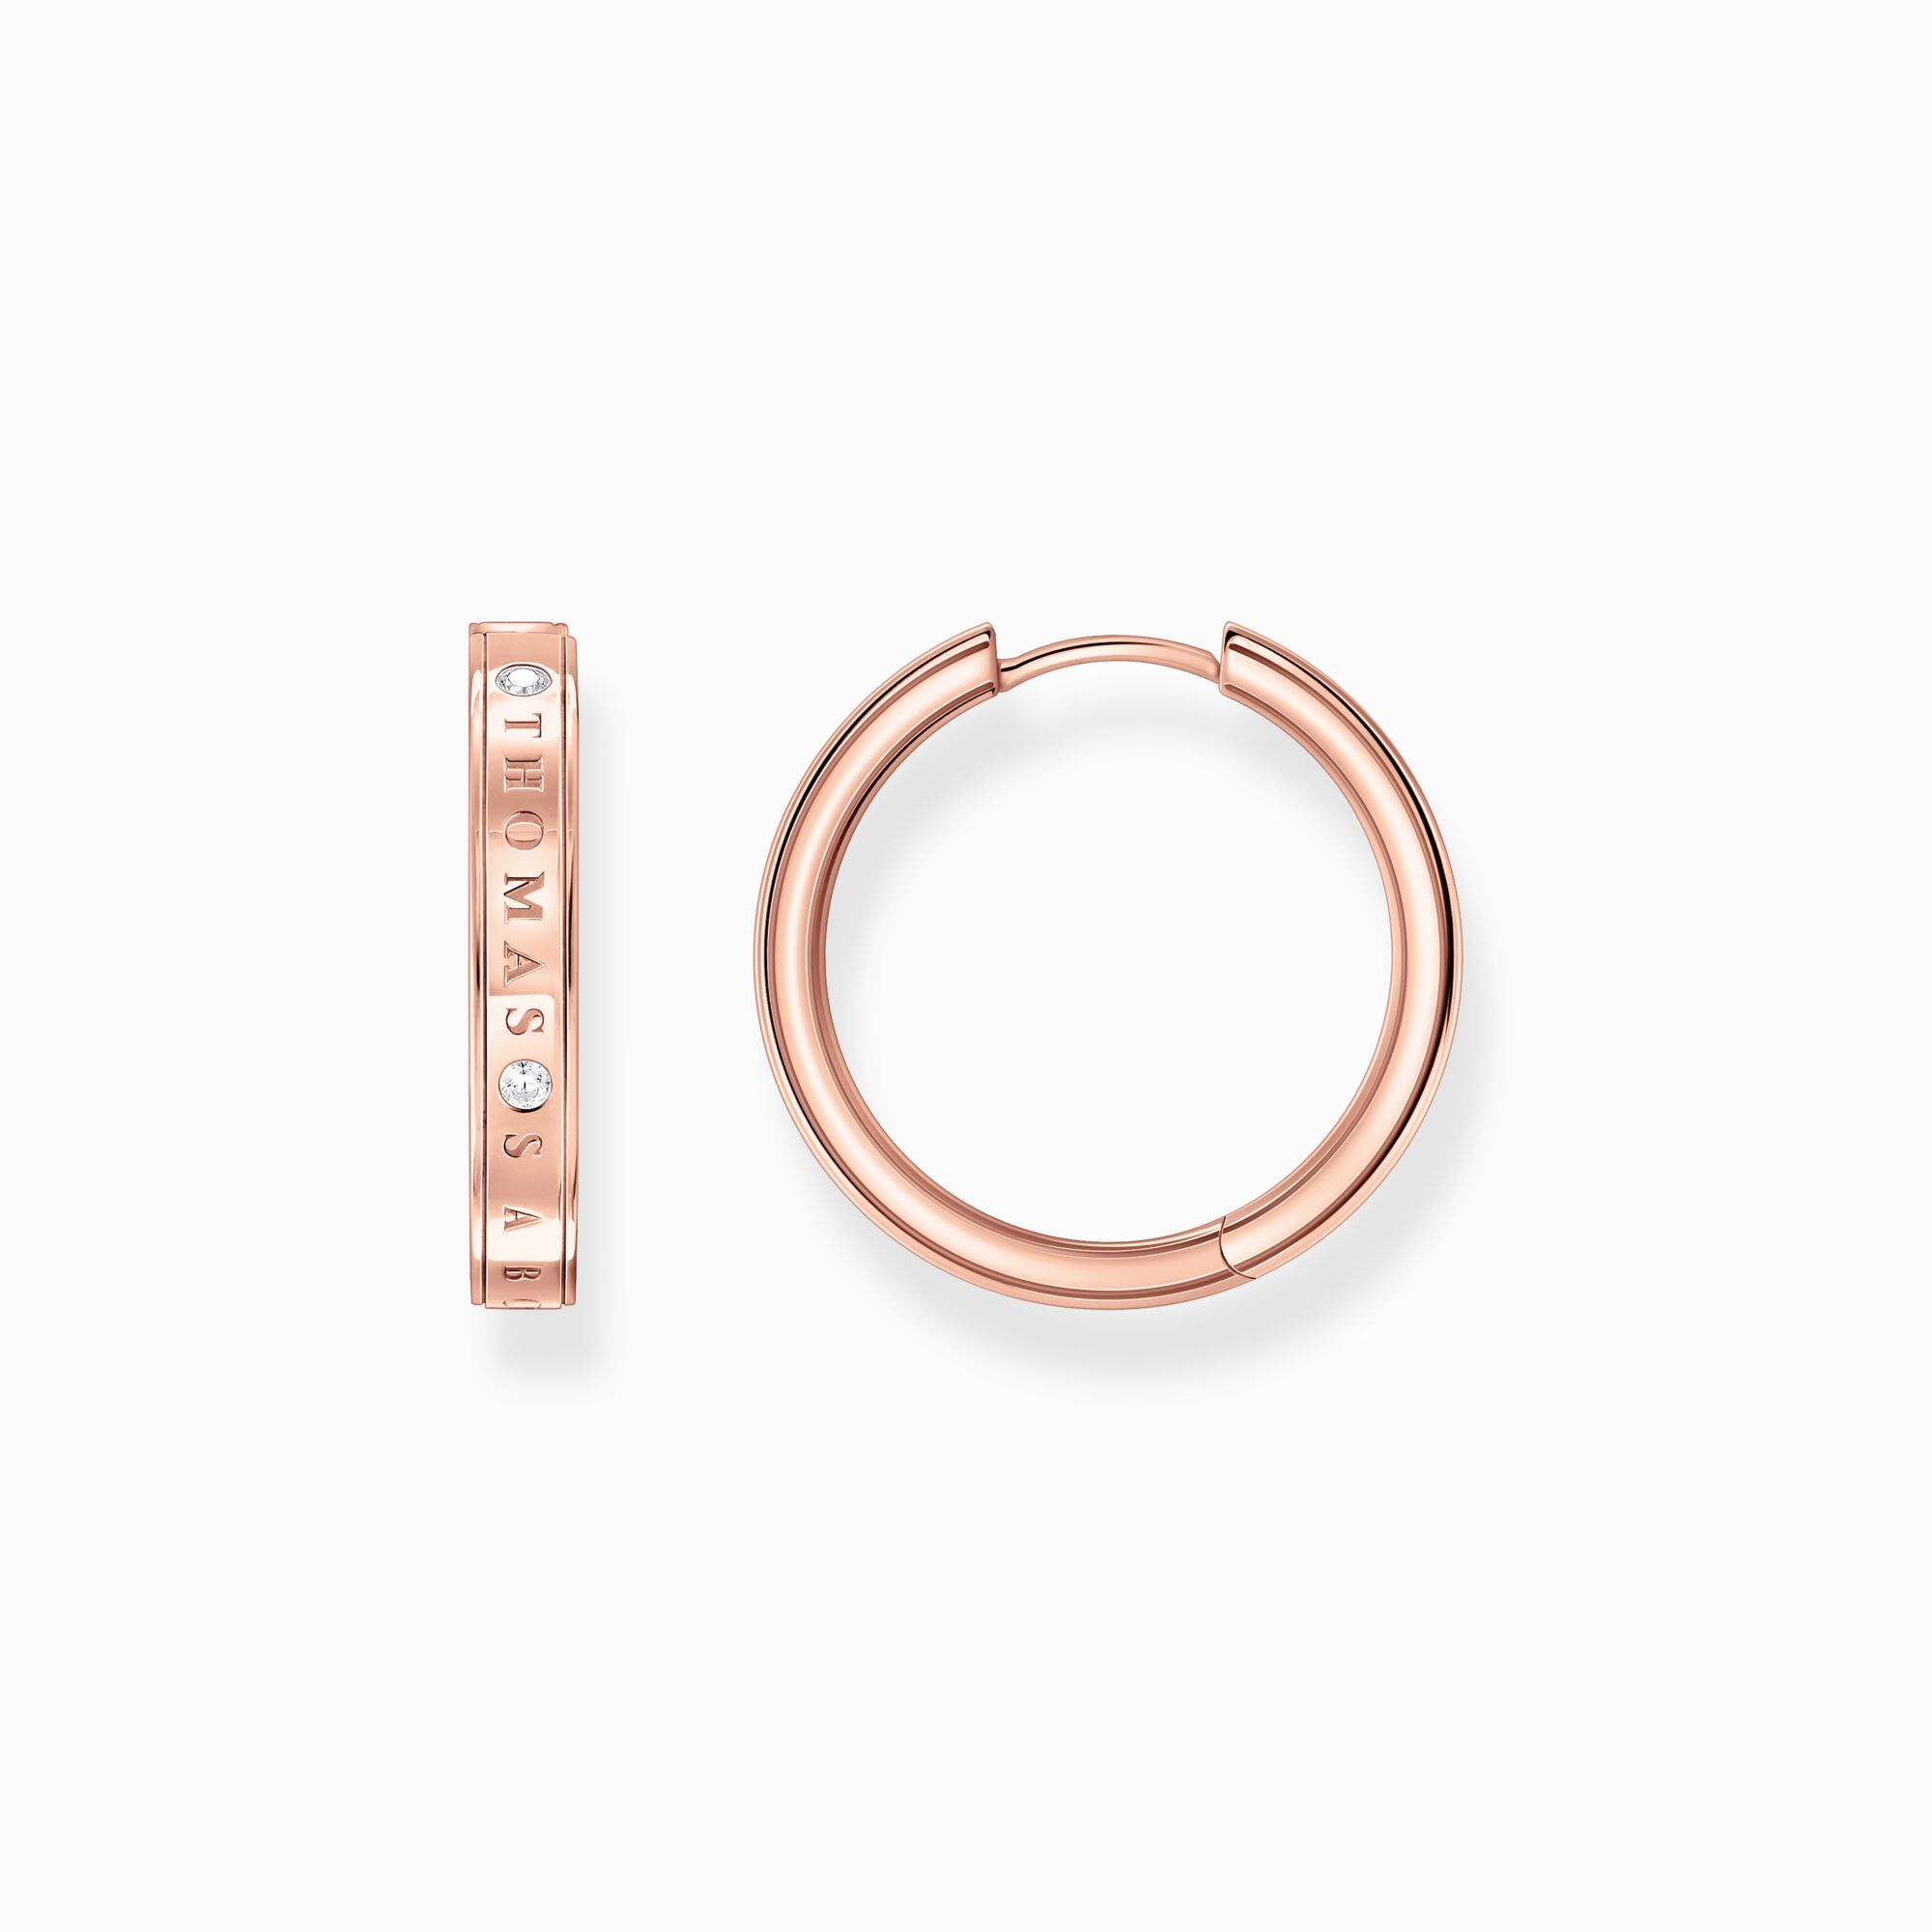 Hoop earrings with white stones rose gold plated from the  collection in the THOMAS SABO online store